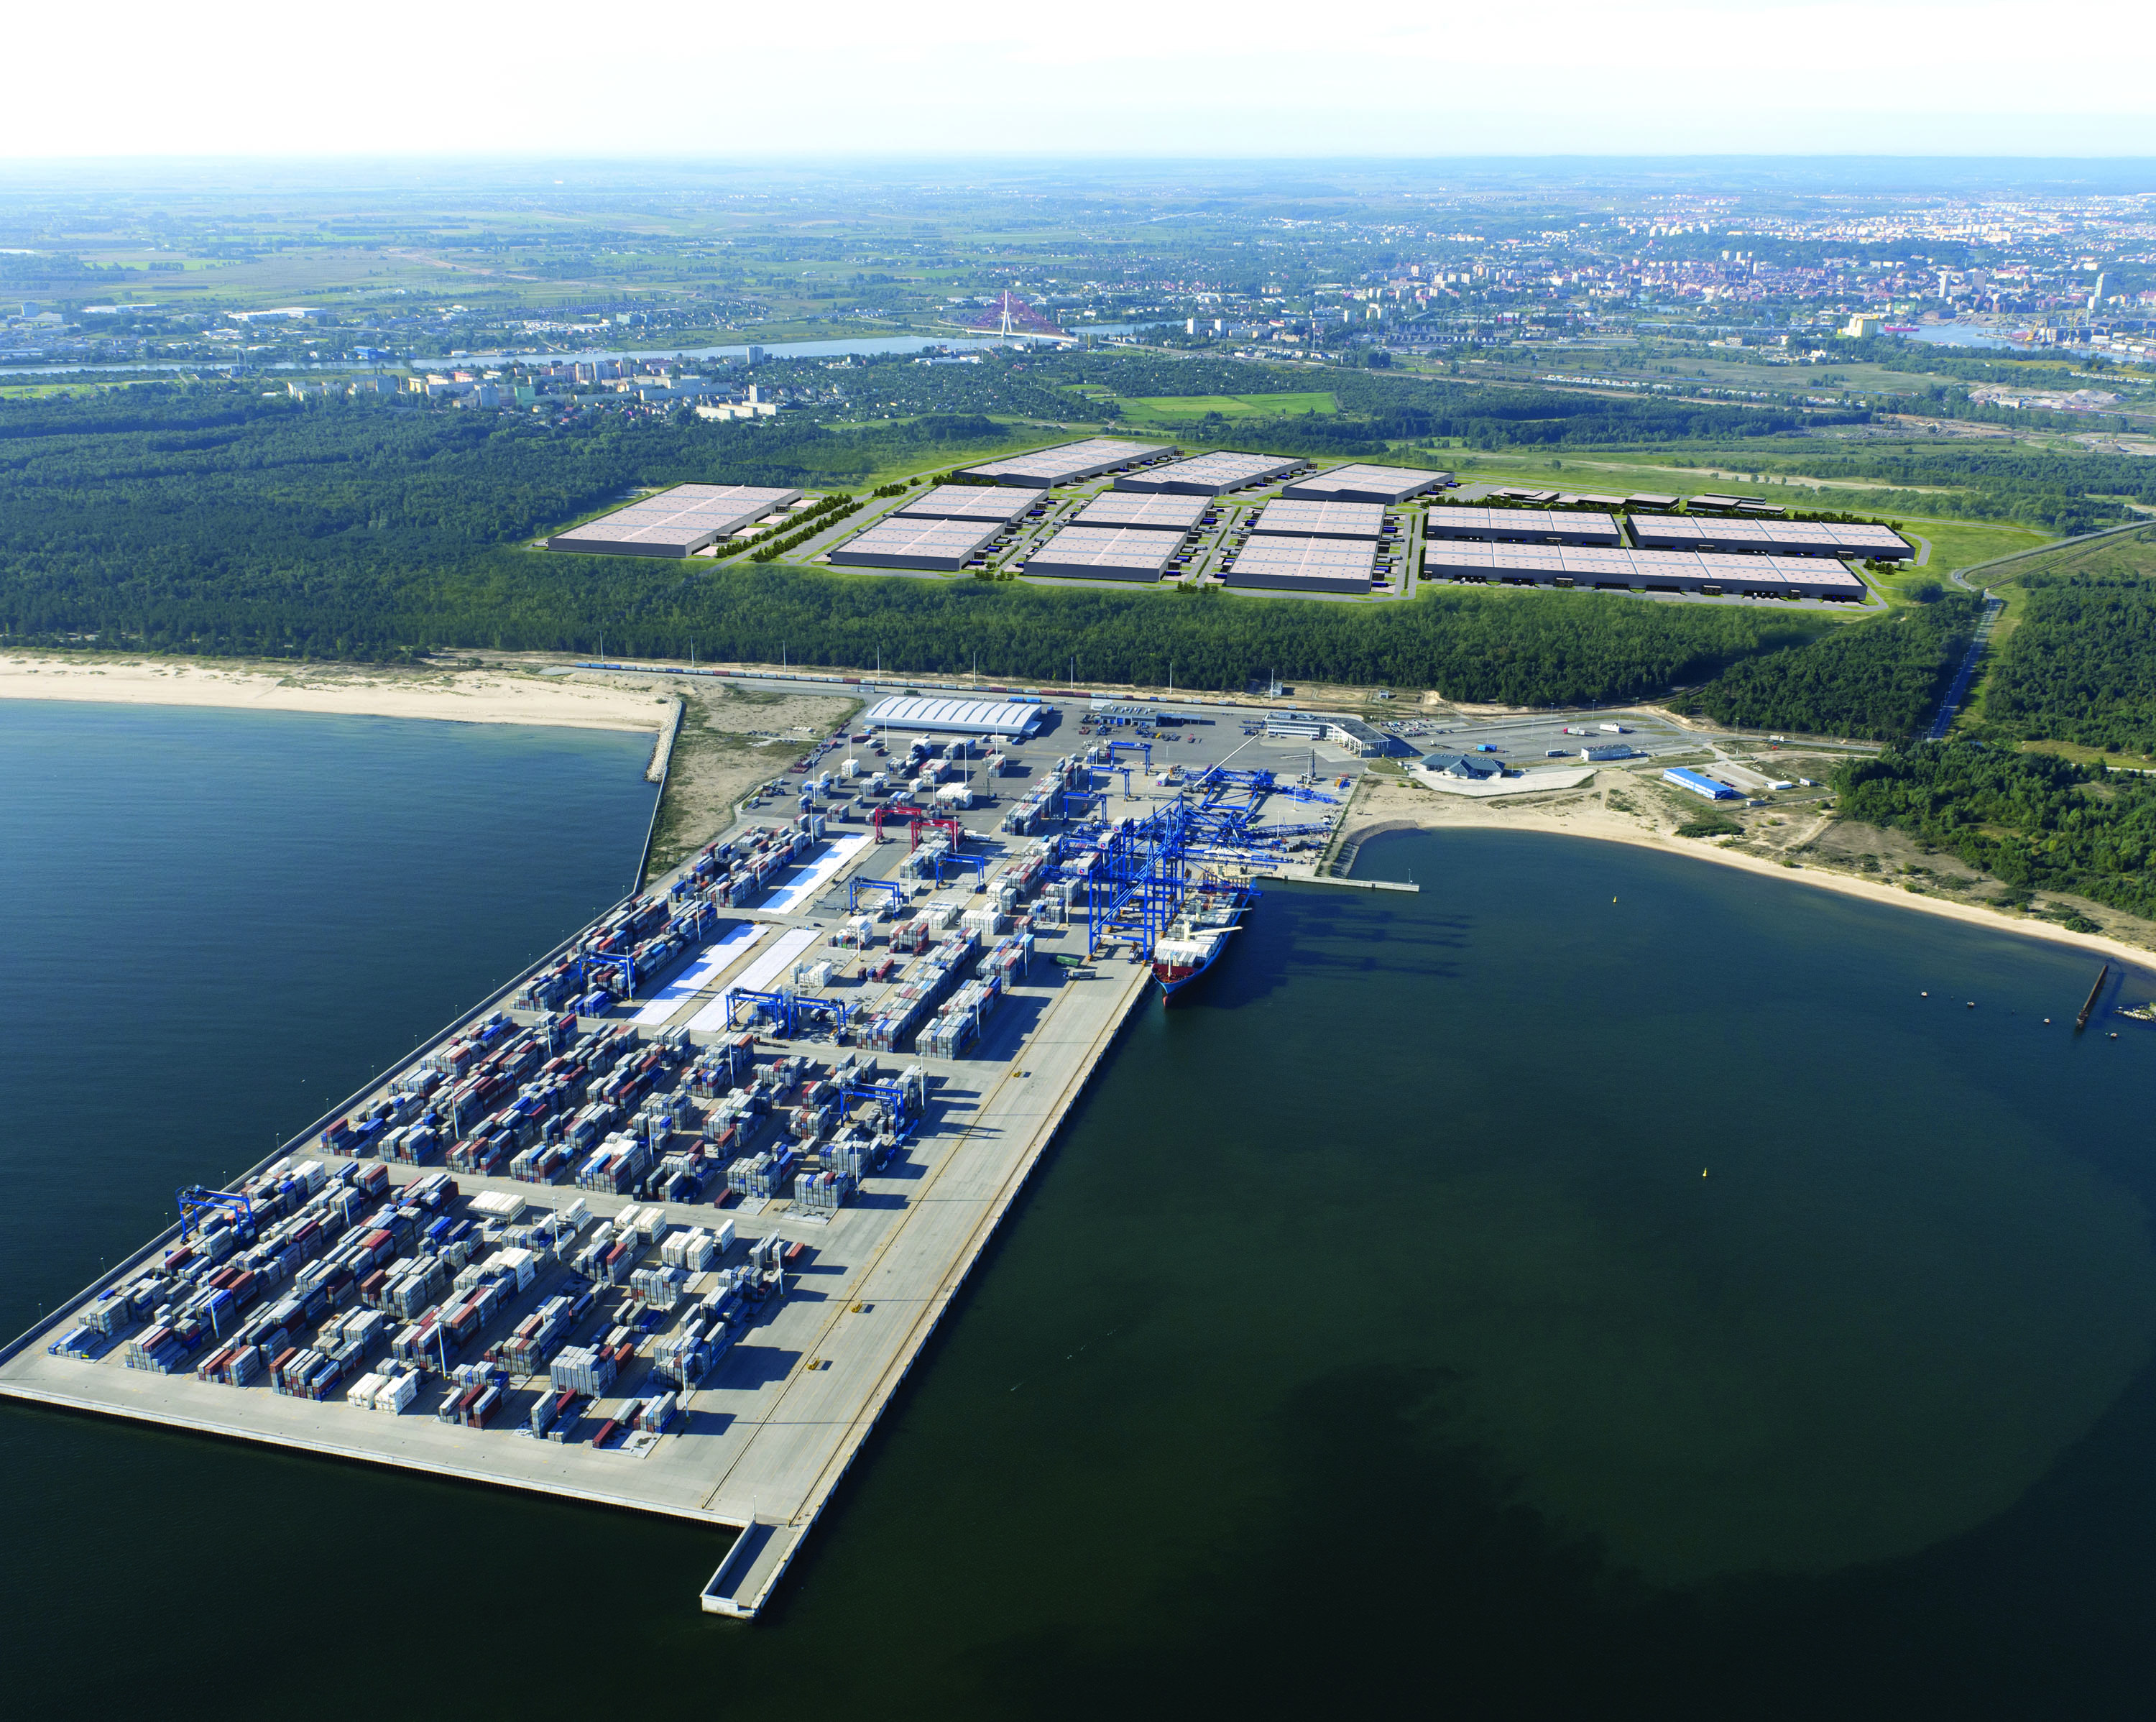 Goodman expands Pomeranian Logisitcs Centre in Gdańsk, Poland with signing of pre-lease agreement - MarinePoland.com